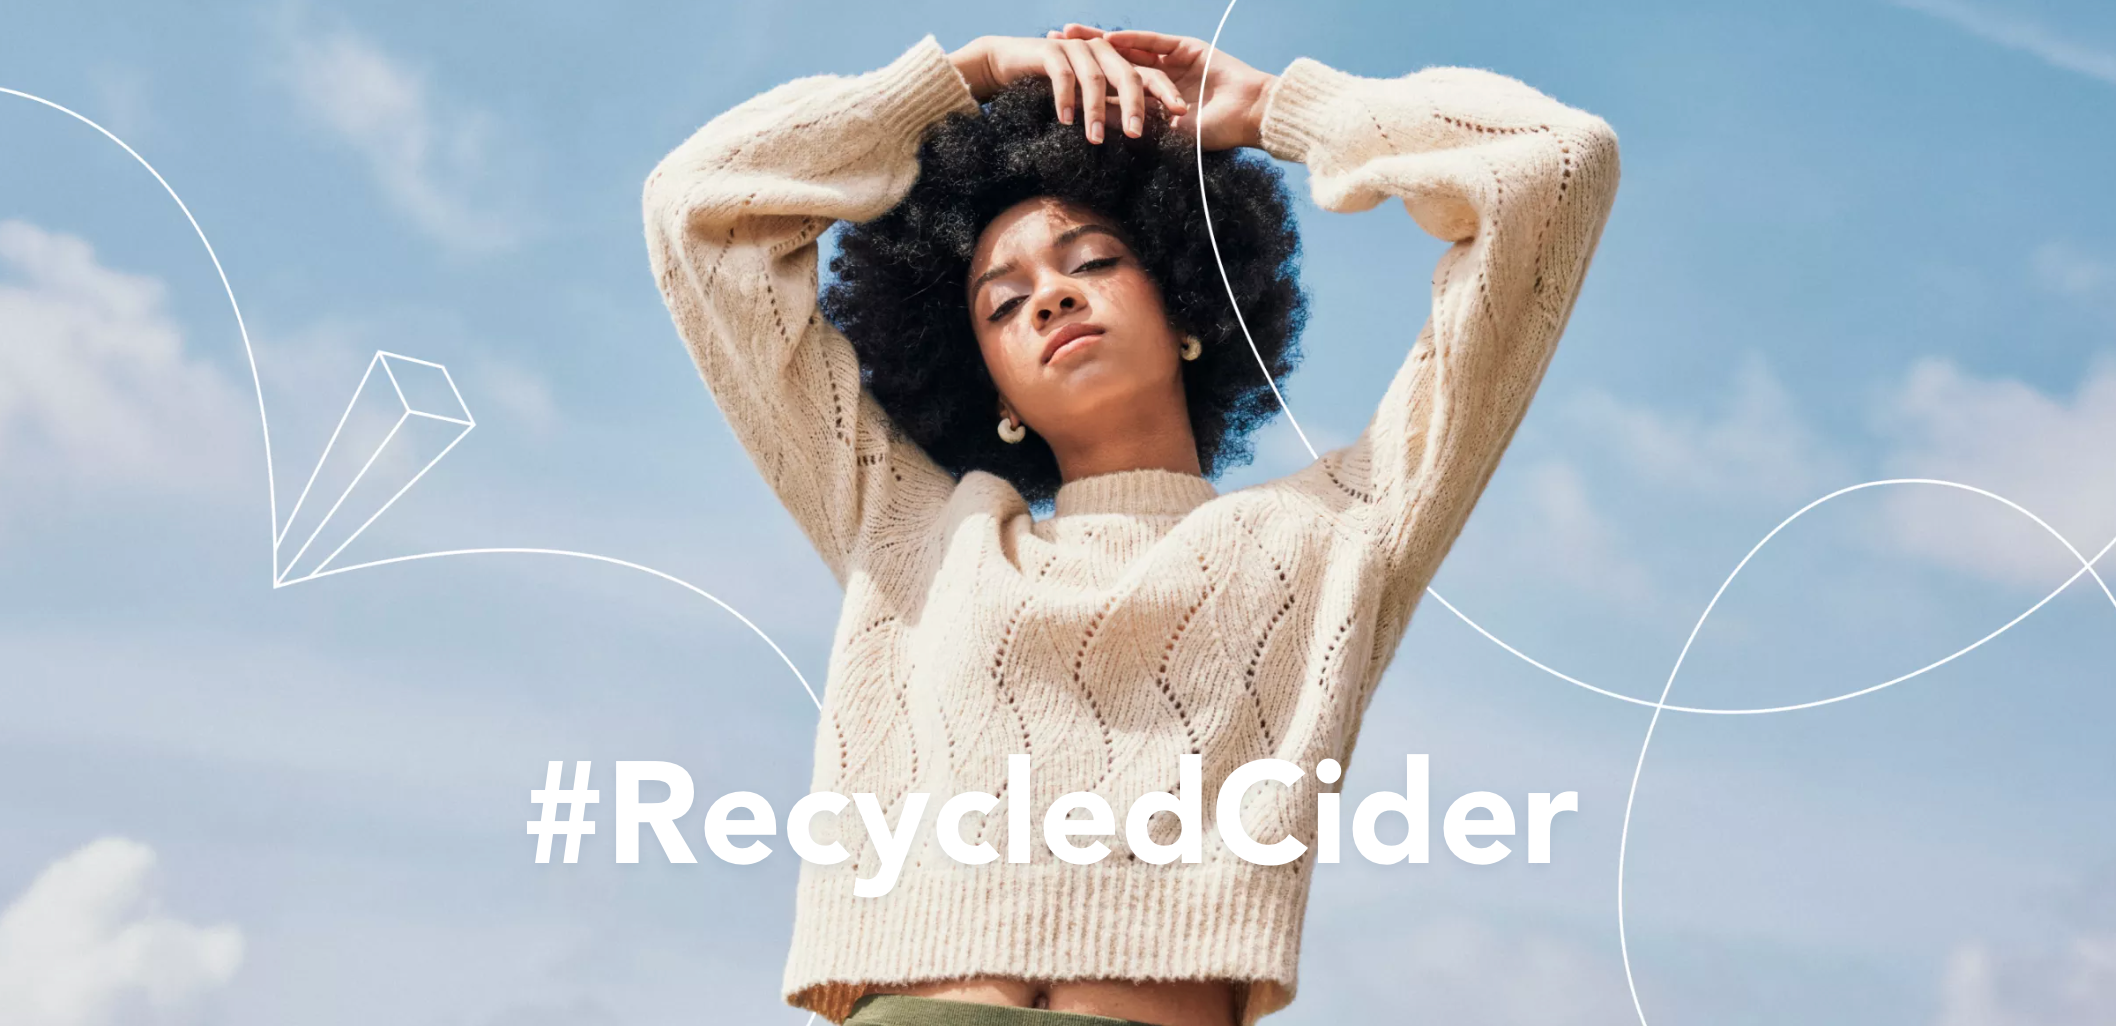 Is Cider Sustainable? What You Can Expect From #RecycledCider